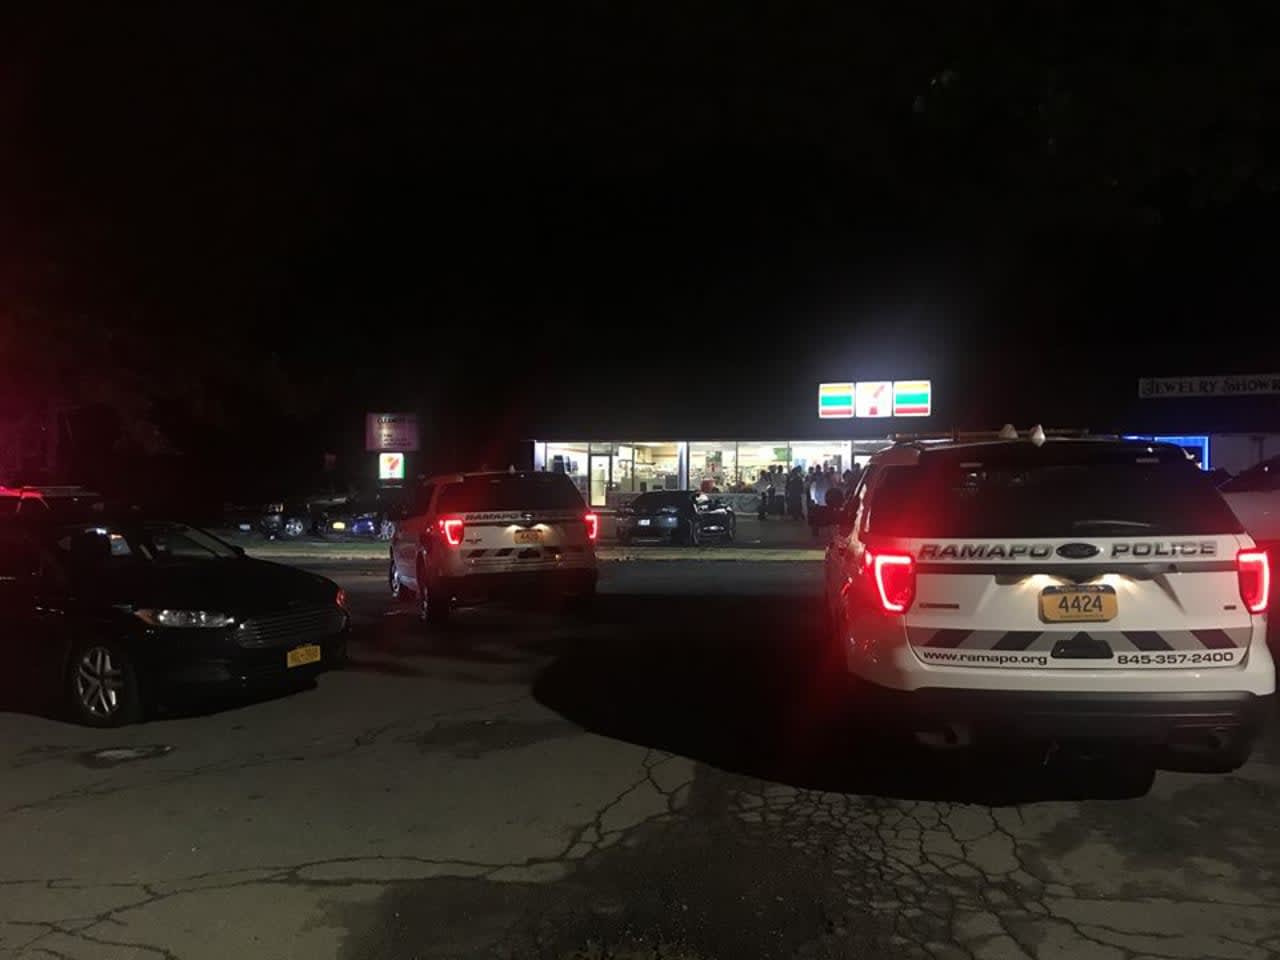 Two people were arrested following a disturbance at the 7-Eleven in Airmont.